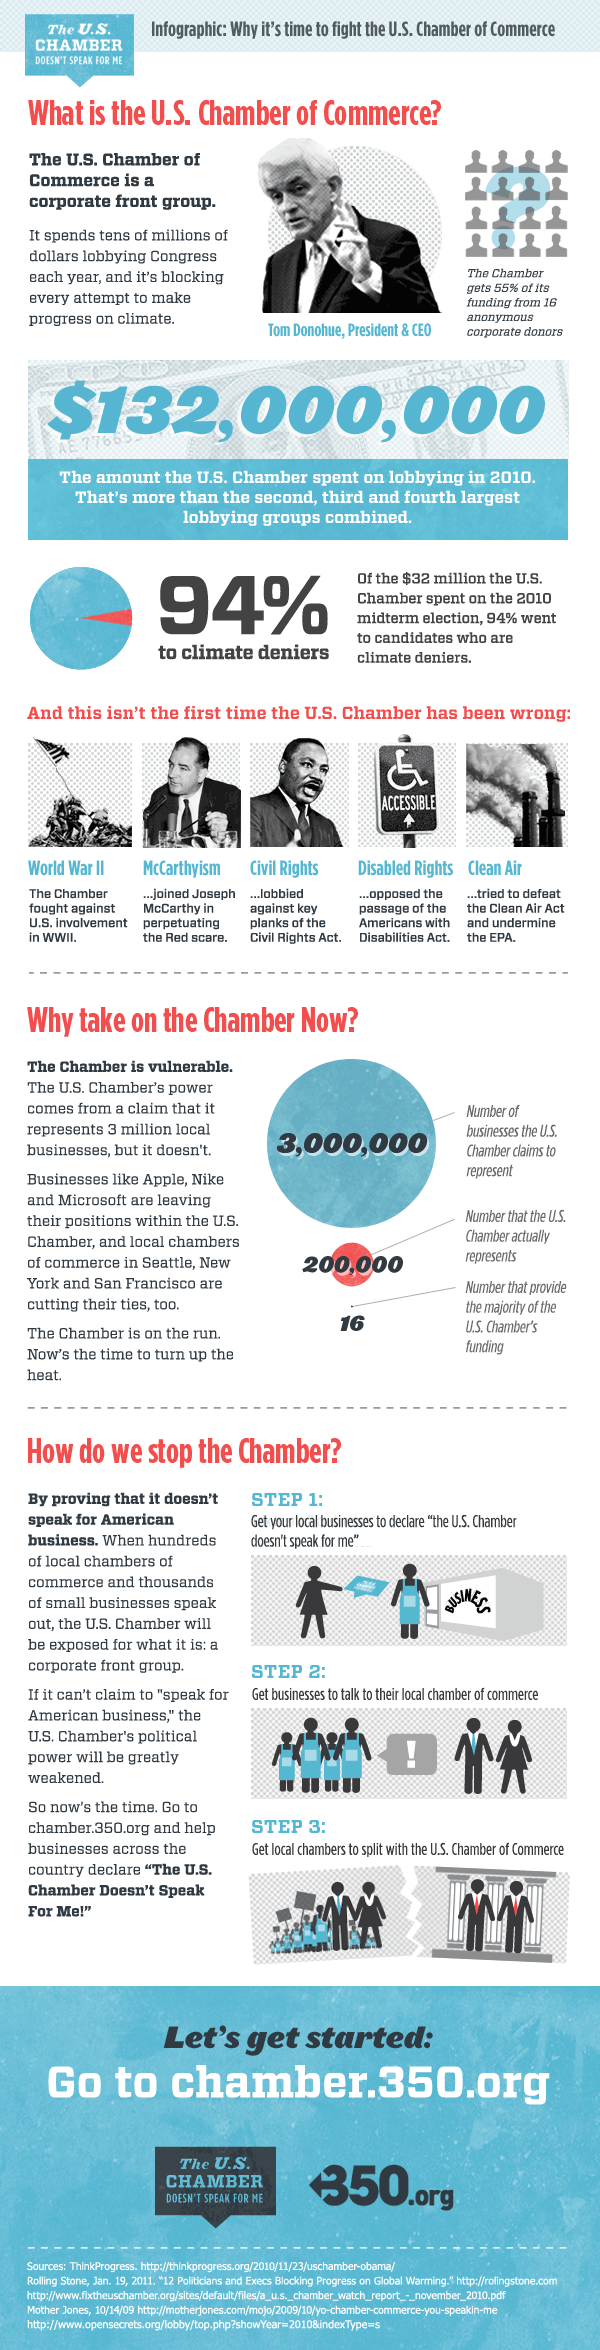 Infographic: Why it's time to fight the U.S. Chamber of Commerce